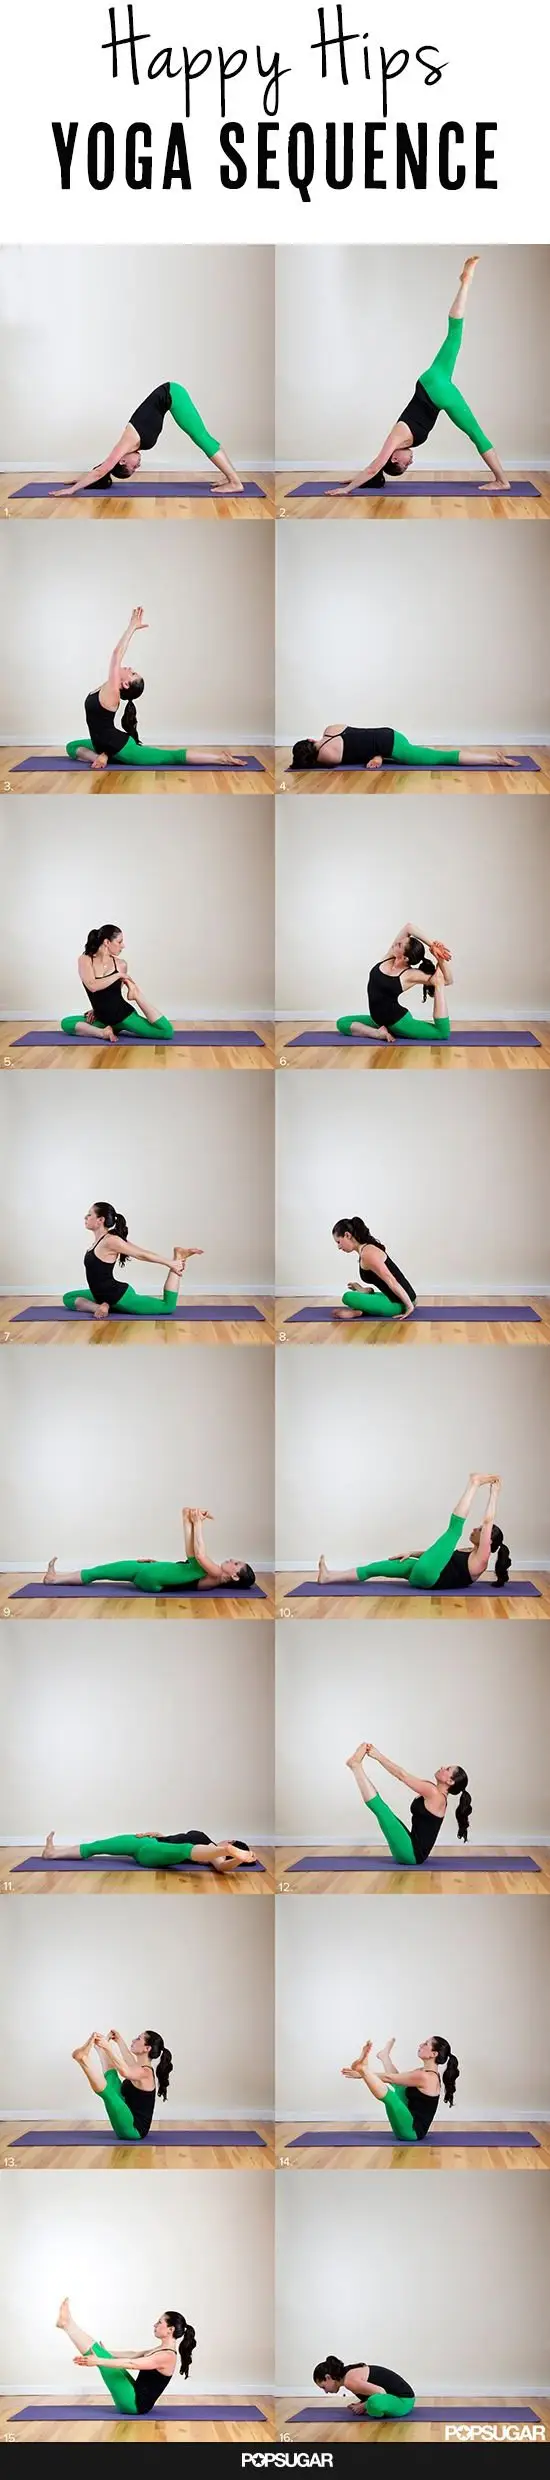 Happy Hips Yoga Sequence